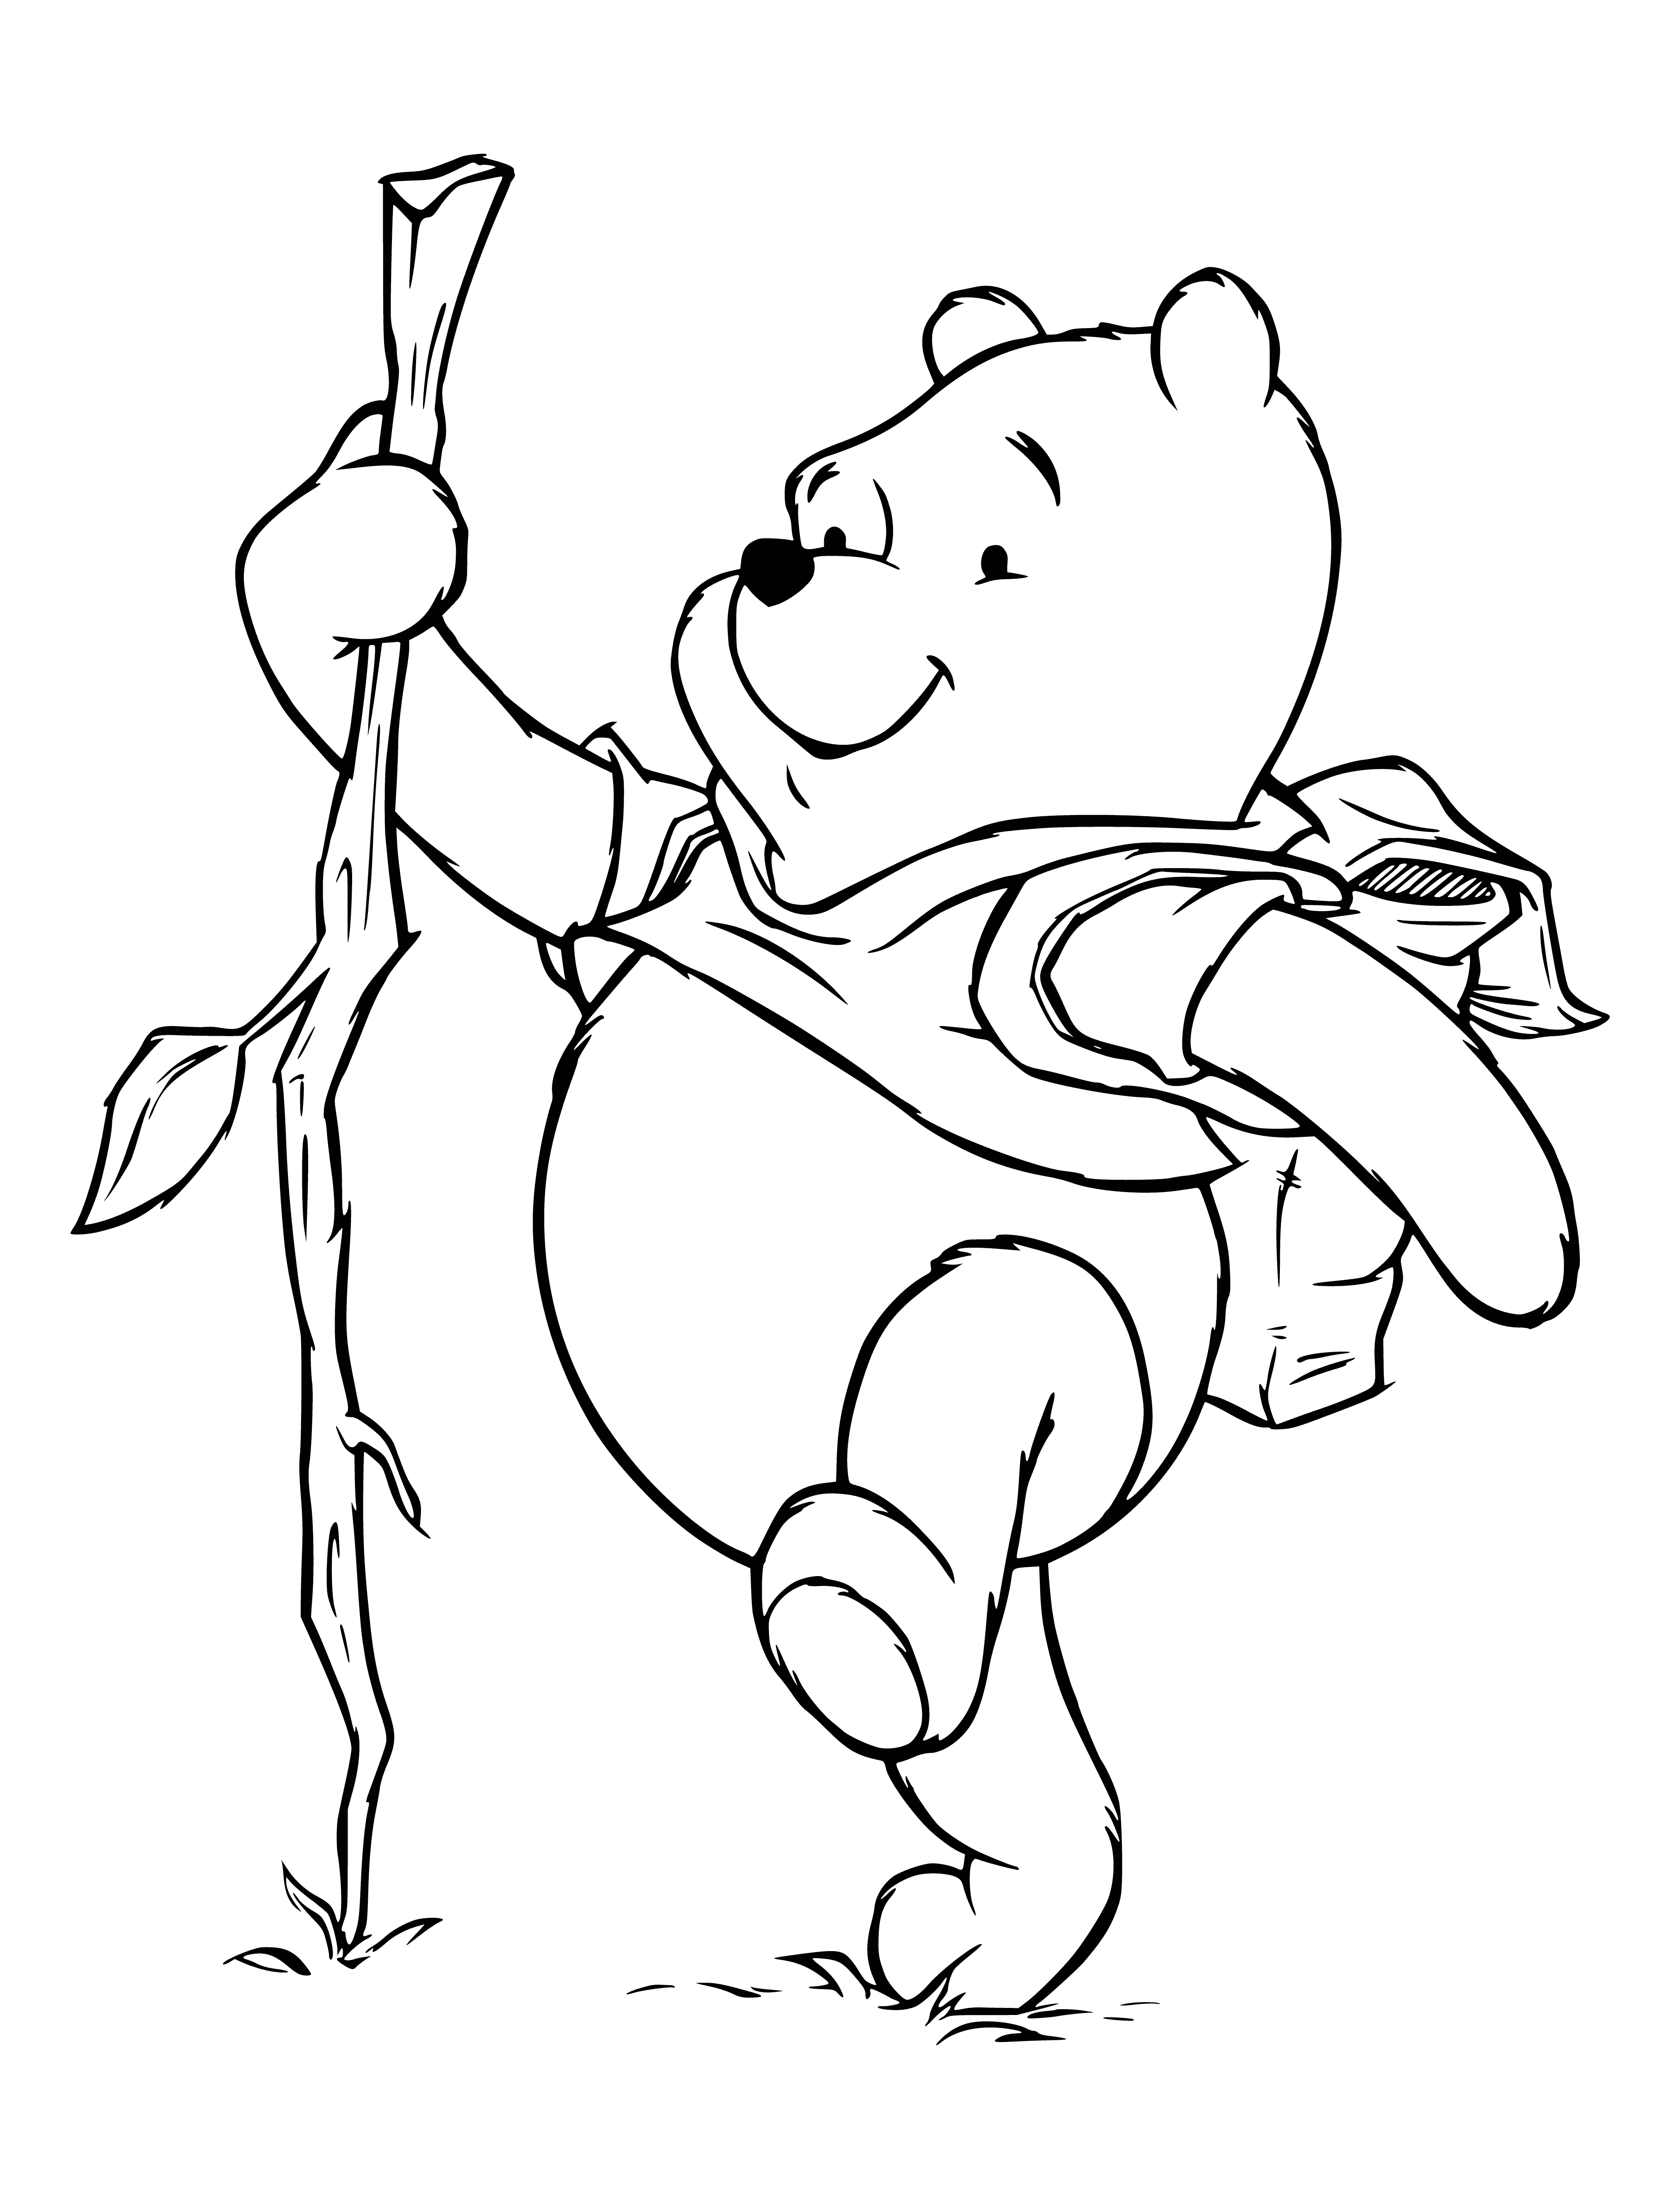 Expedition coloring page